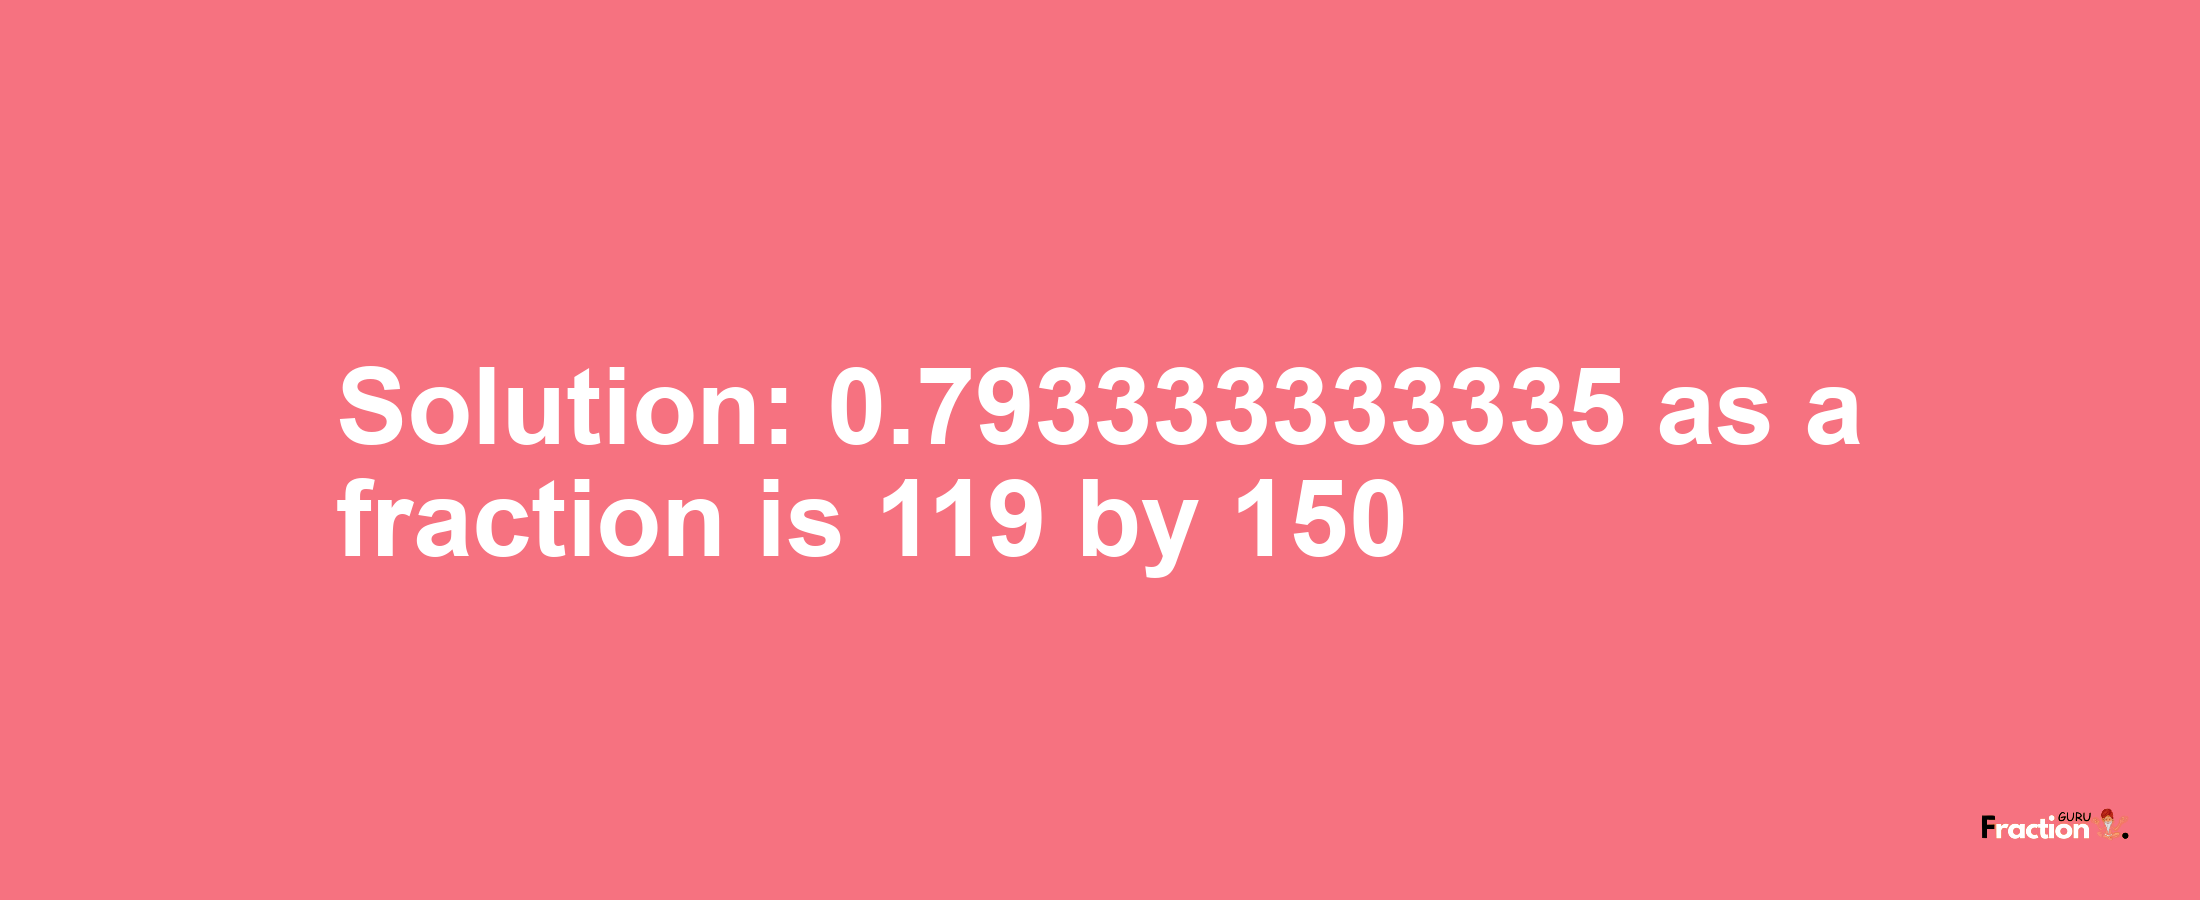 Solution:0.793333333335 as a fraction is 119/150